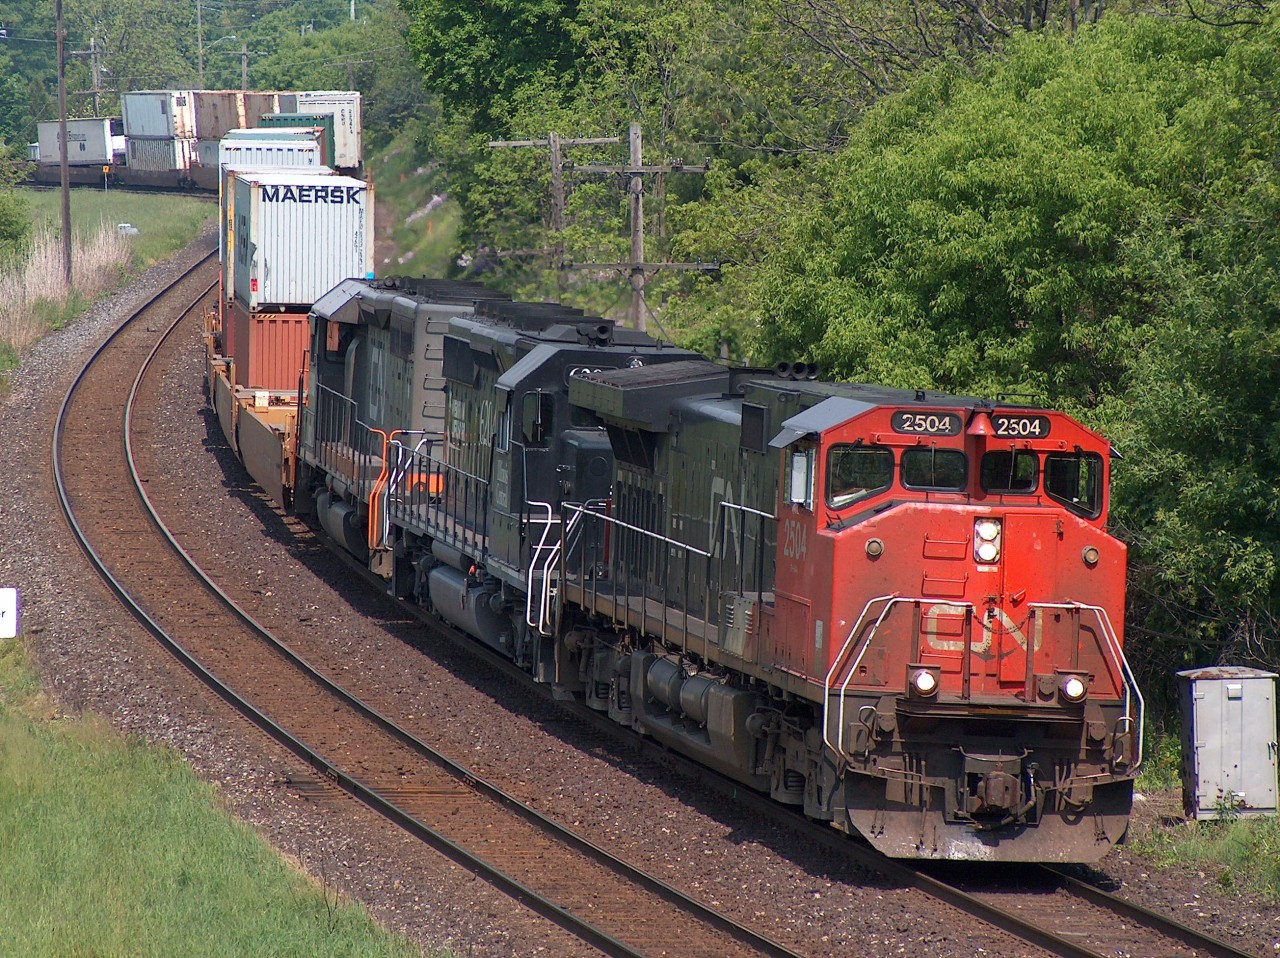 CN 148 with wide cab CN 2504 leading an IC unit, and one of those WC reporting marked grey with orange striped CN units that were commonplace back in 2006, eases around the curves through Paris on May 28, 2006.